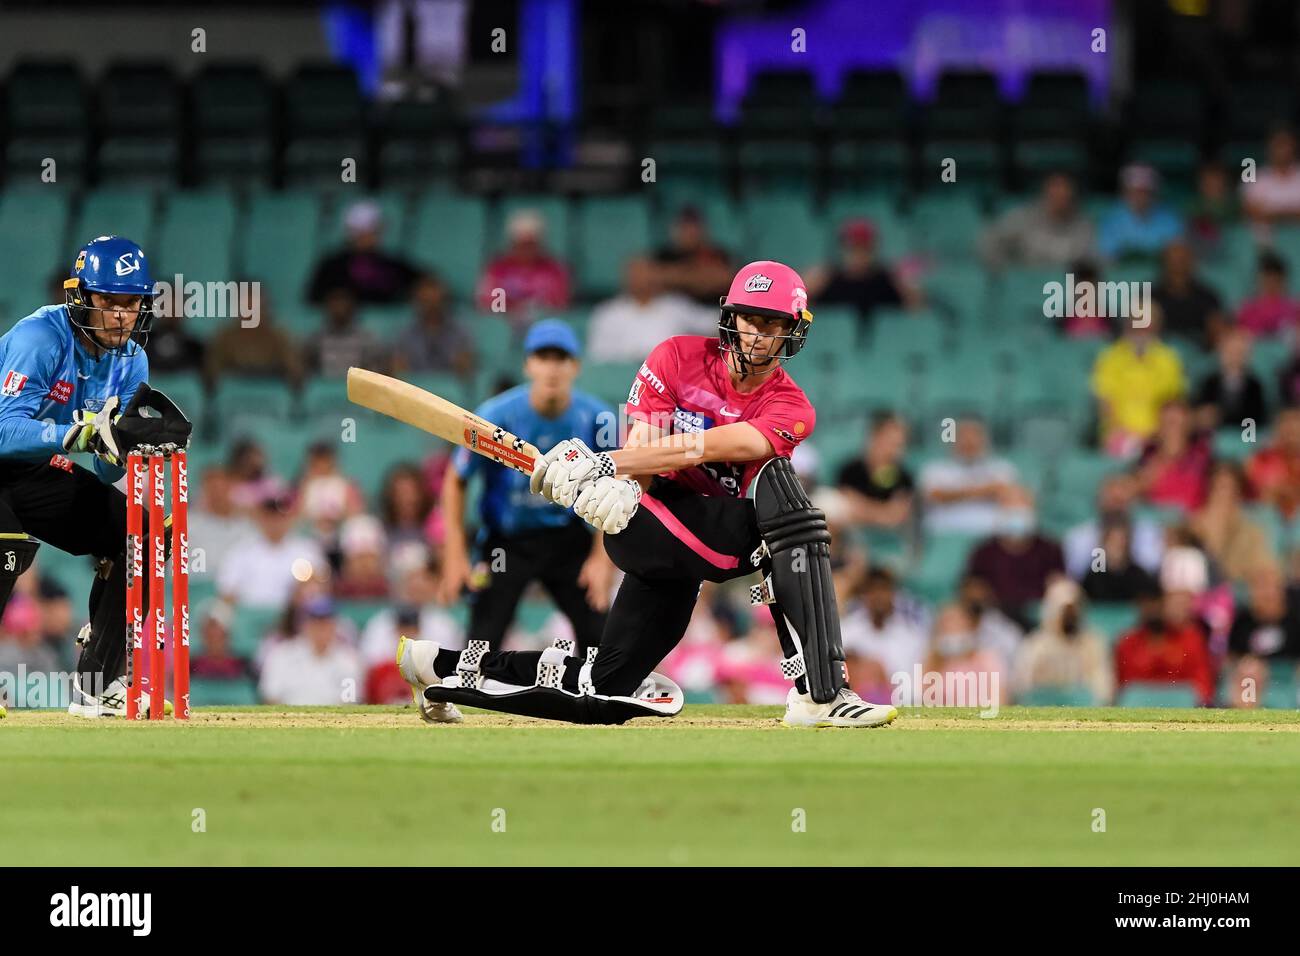 Sydney, Australia, 26 January, 2022. Carlos Brathwaite of the Sixers hits the ball during the Big Bash League Challenger cricket match between Sydney Sixers and Adelaide Strikers at The Sydney Cricket Ground on January 26, 2022 in Sydney, Australia. Credit: Steven Markham/Speed Media/Alamy Live News Stock Photo